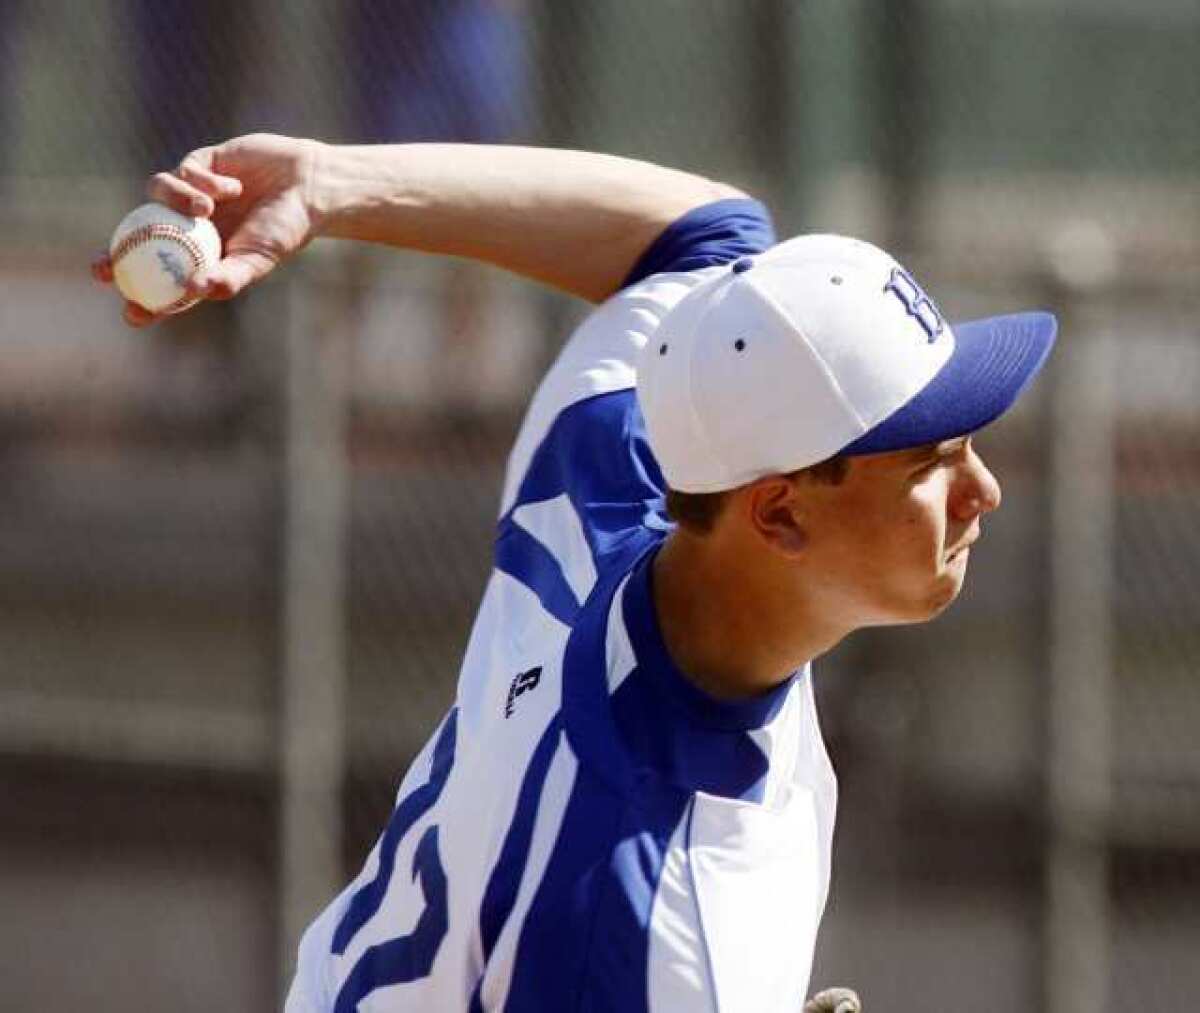 ARCHIVE PHOTO: The Burbank Bulldogs (13-10) lost some key players to graduation, including first-team all-league pitcher Daniel Starkand, who was 5-3 with a 0.60 earned-run average in 58 innings pitched in league.